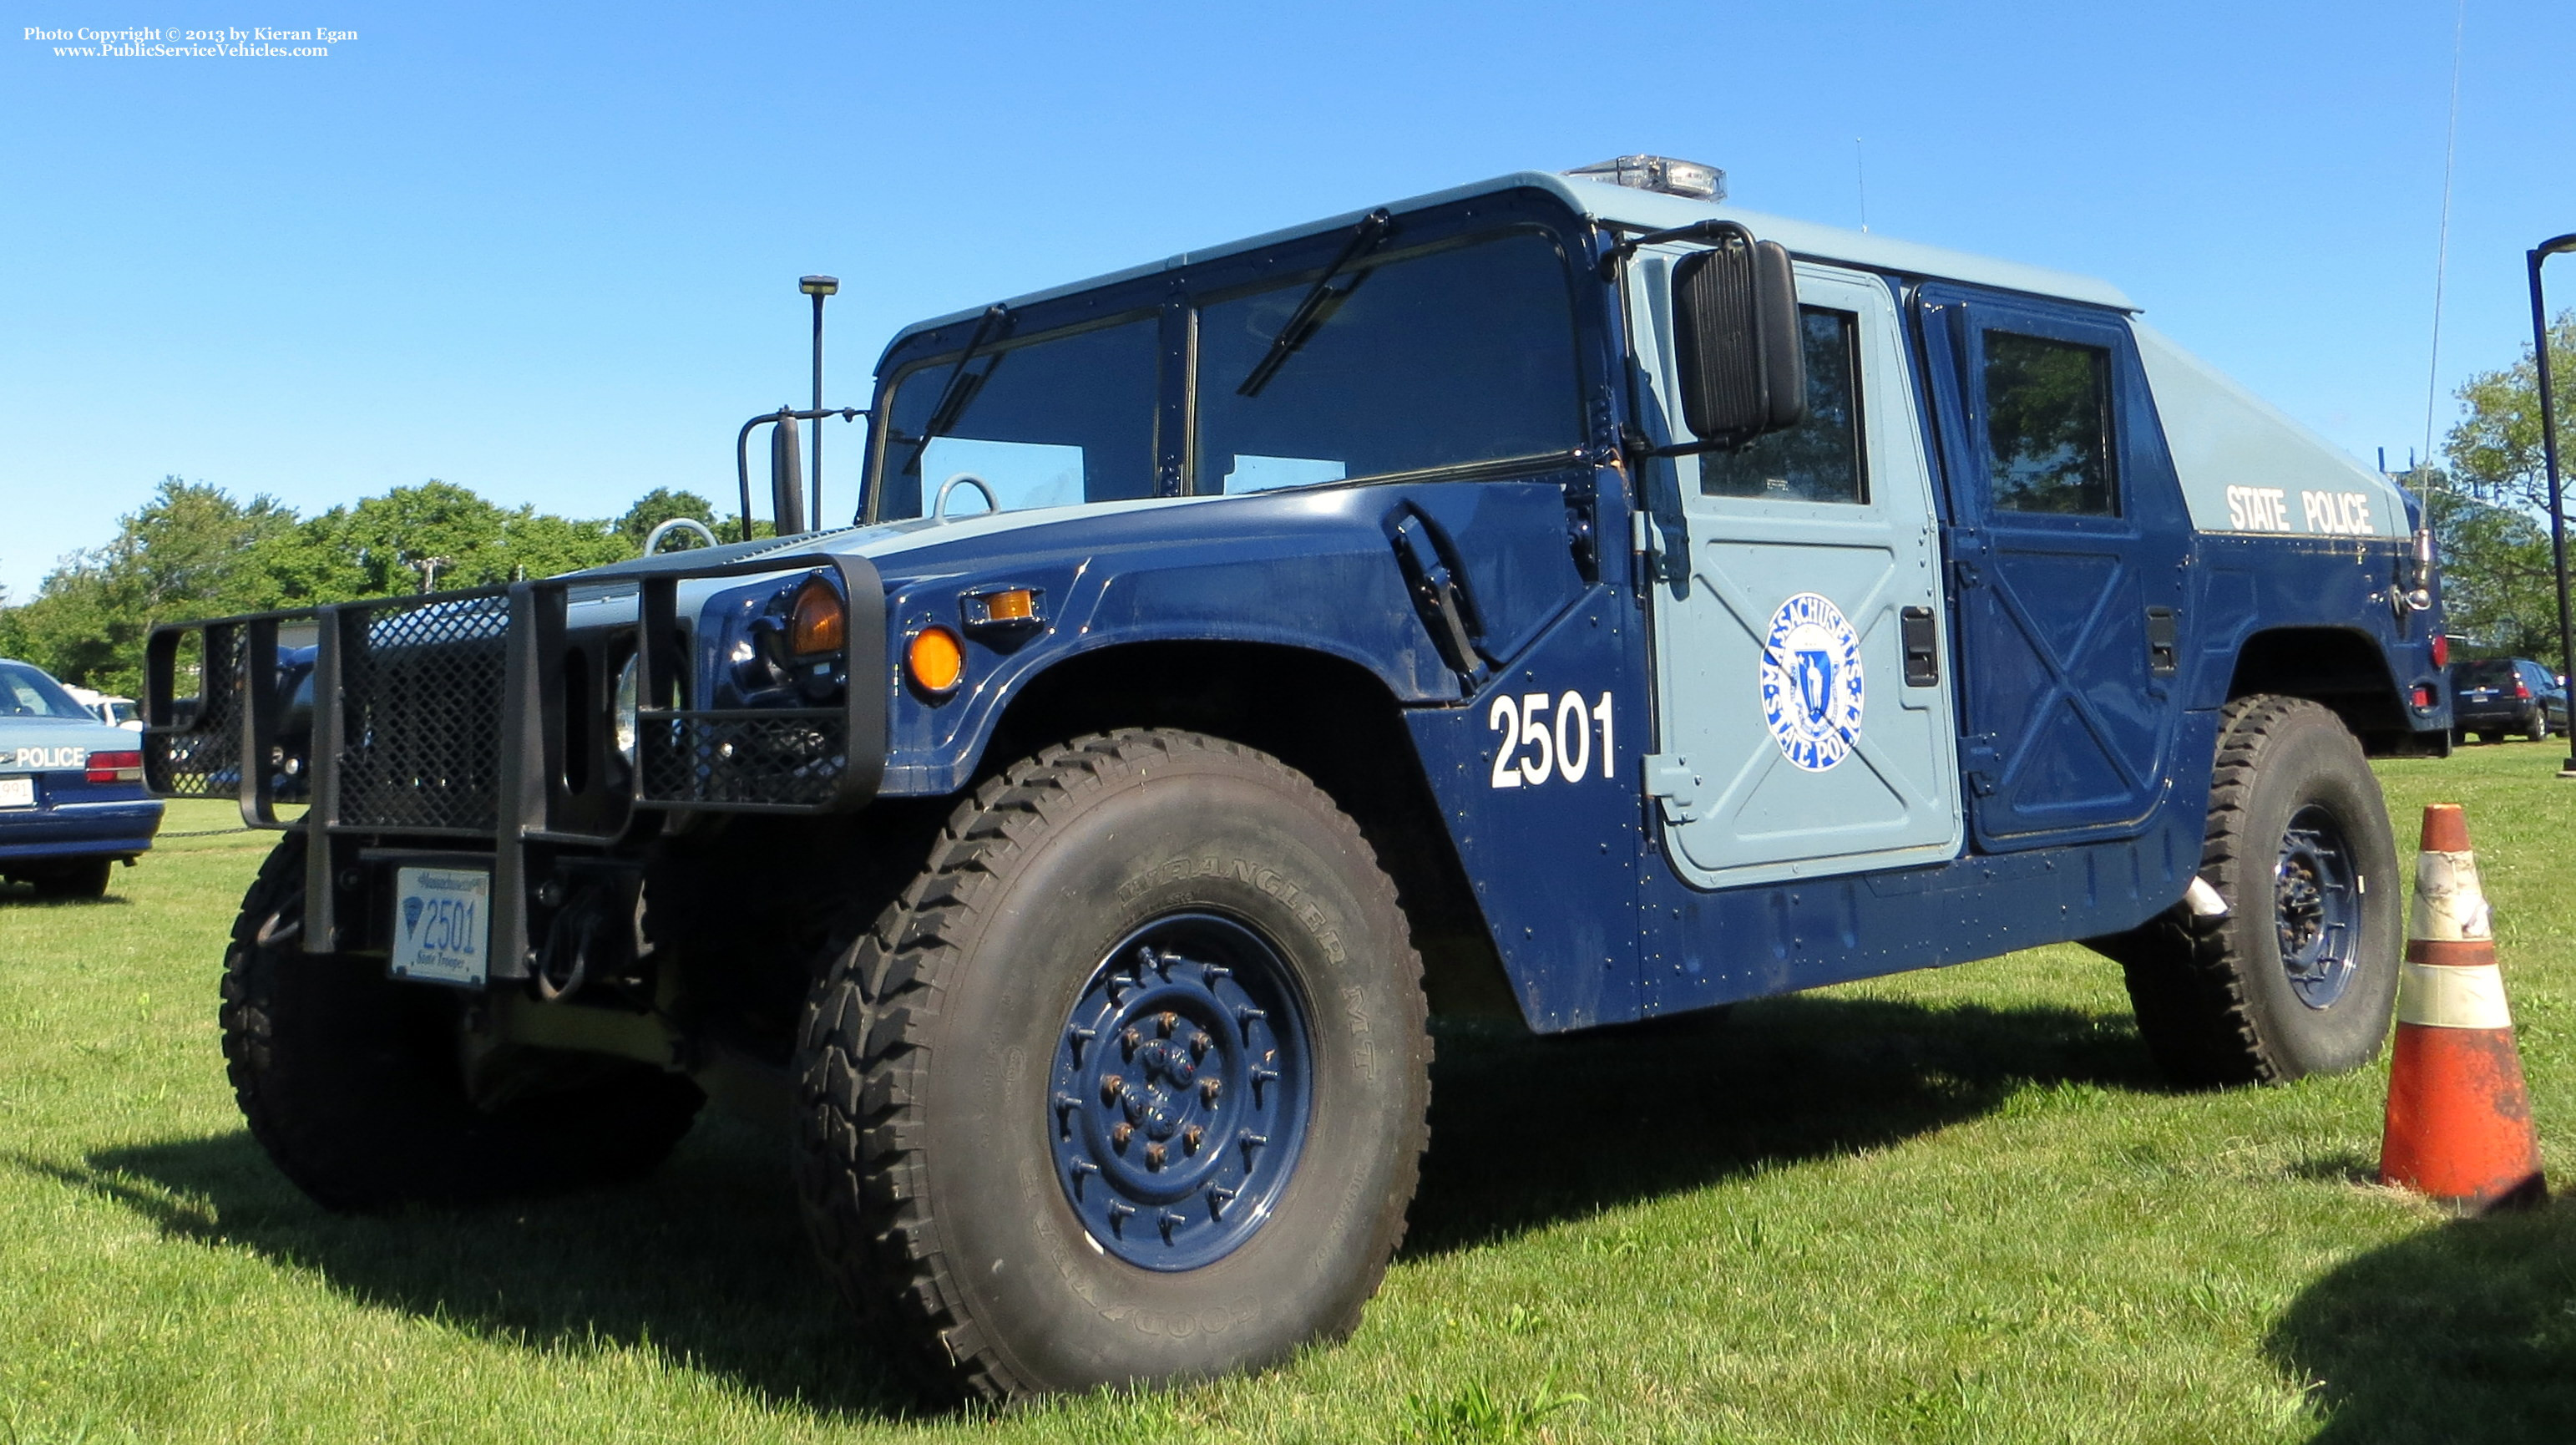 A photo  of Massachusetts State Police
            Humvee 2501, a 1993 AM General Hummer H3             taken by Kieran Egan